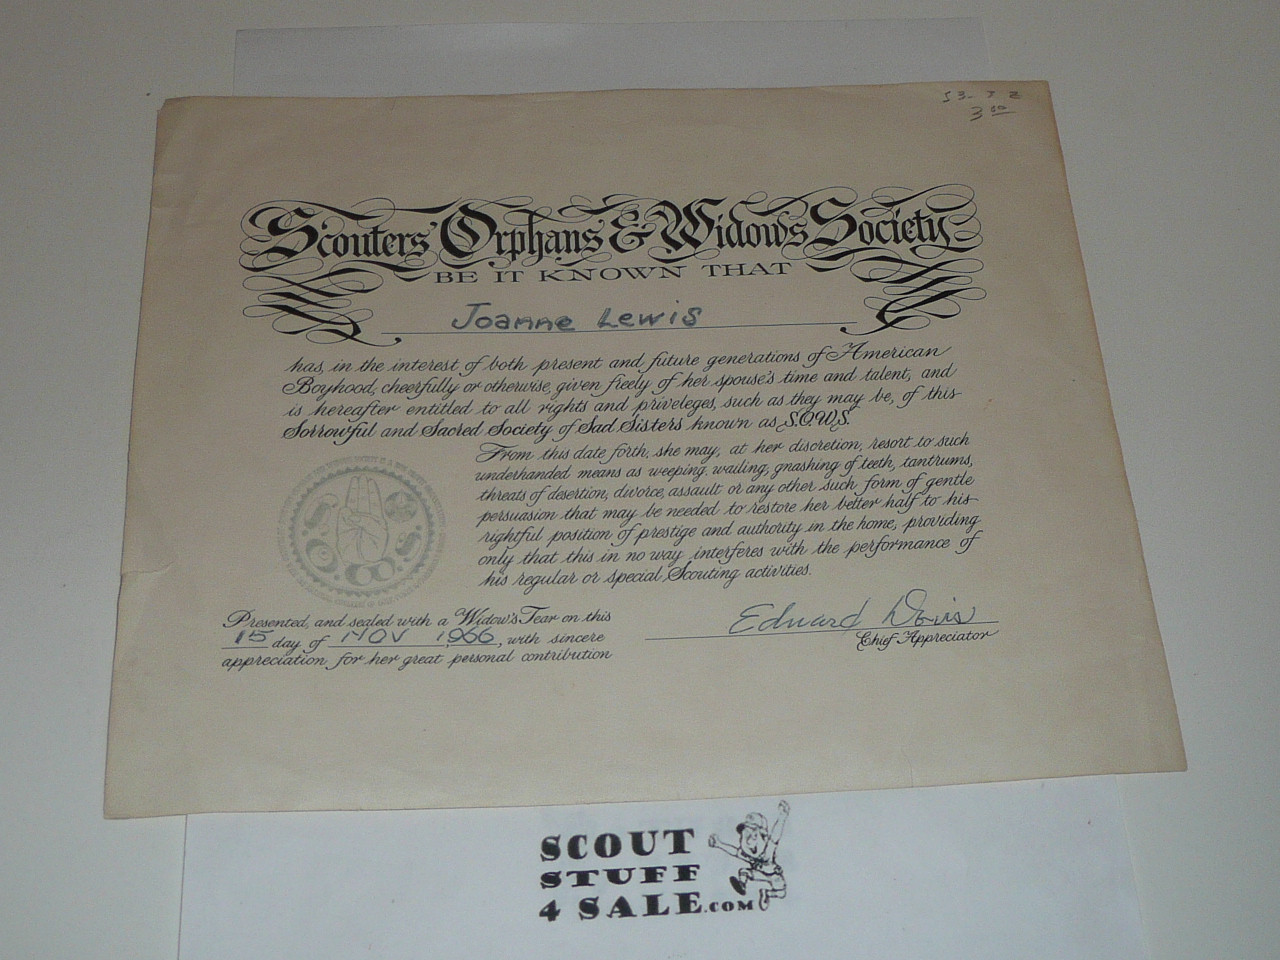 1966 Scouter's Orphans & Widows Society Certificate